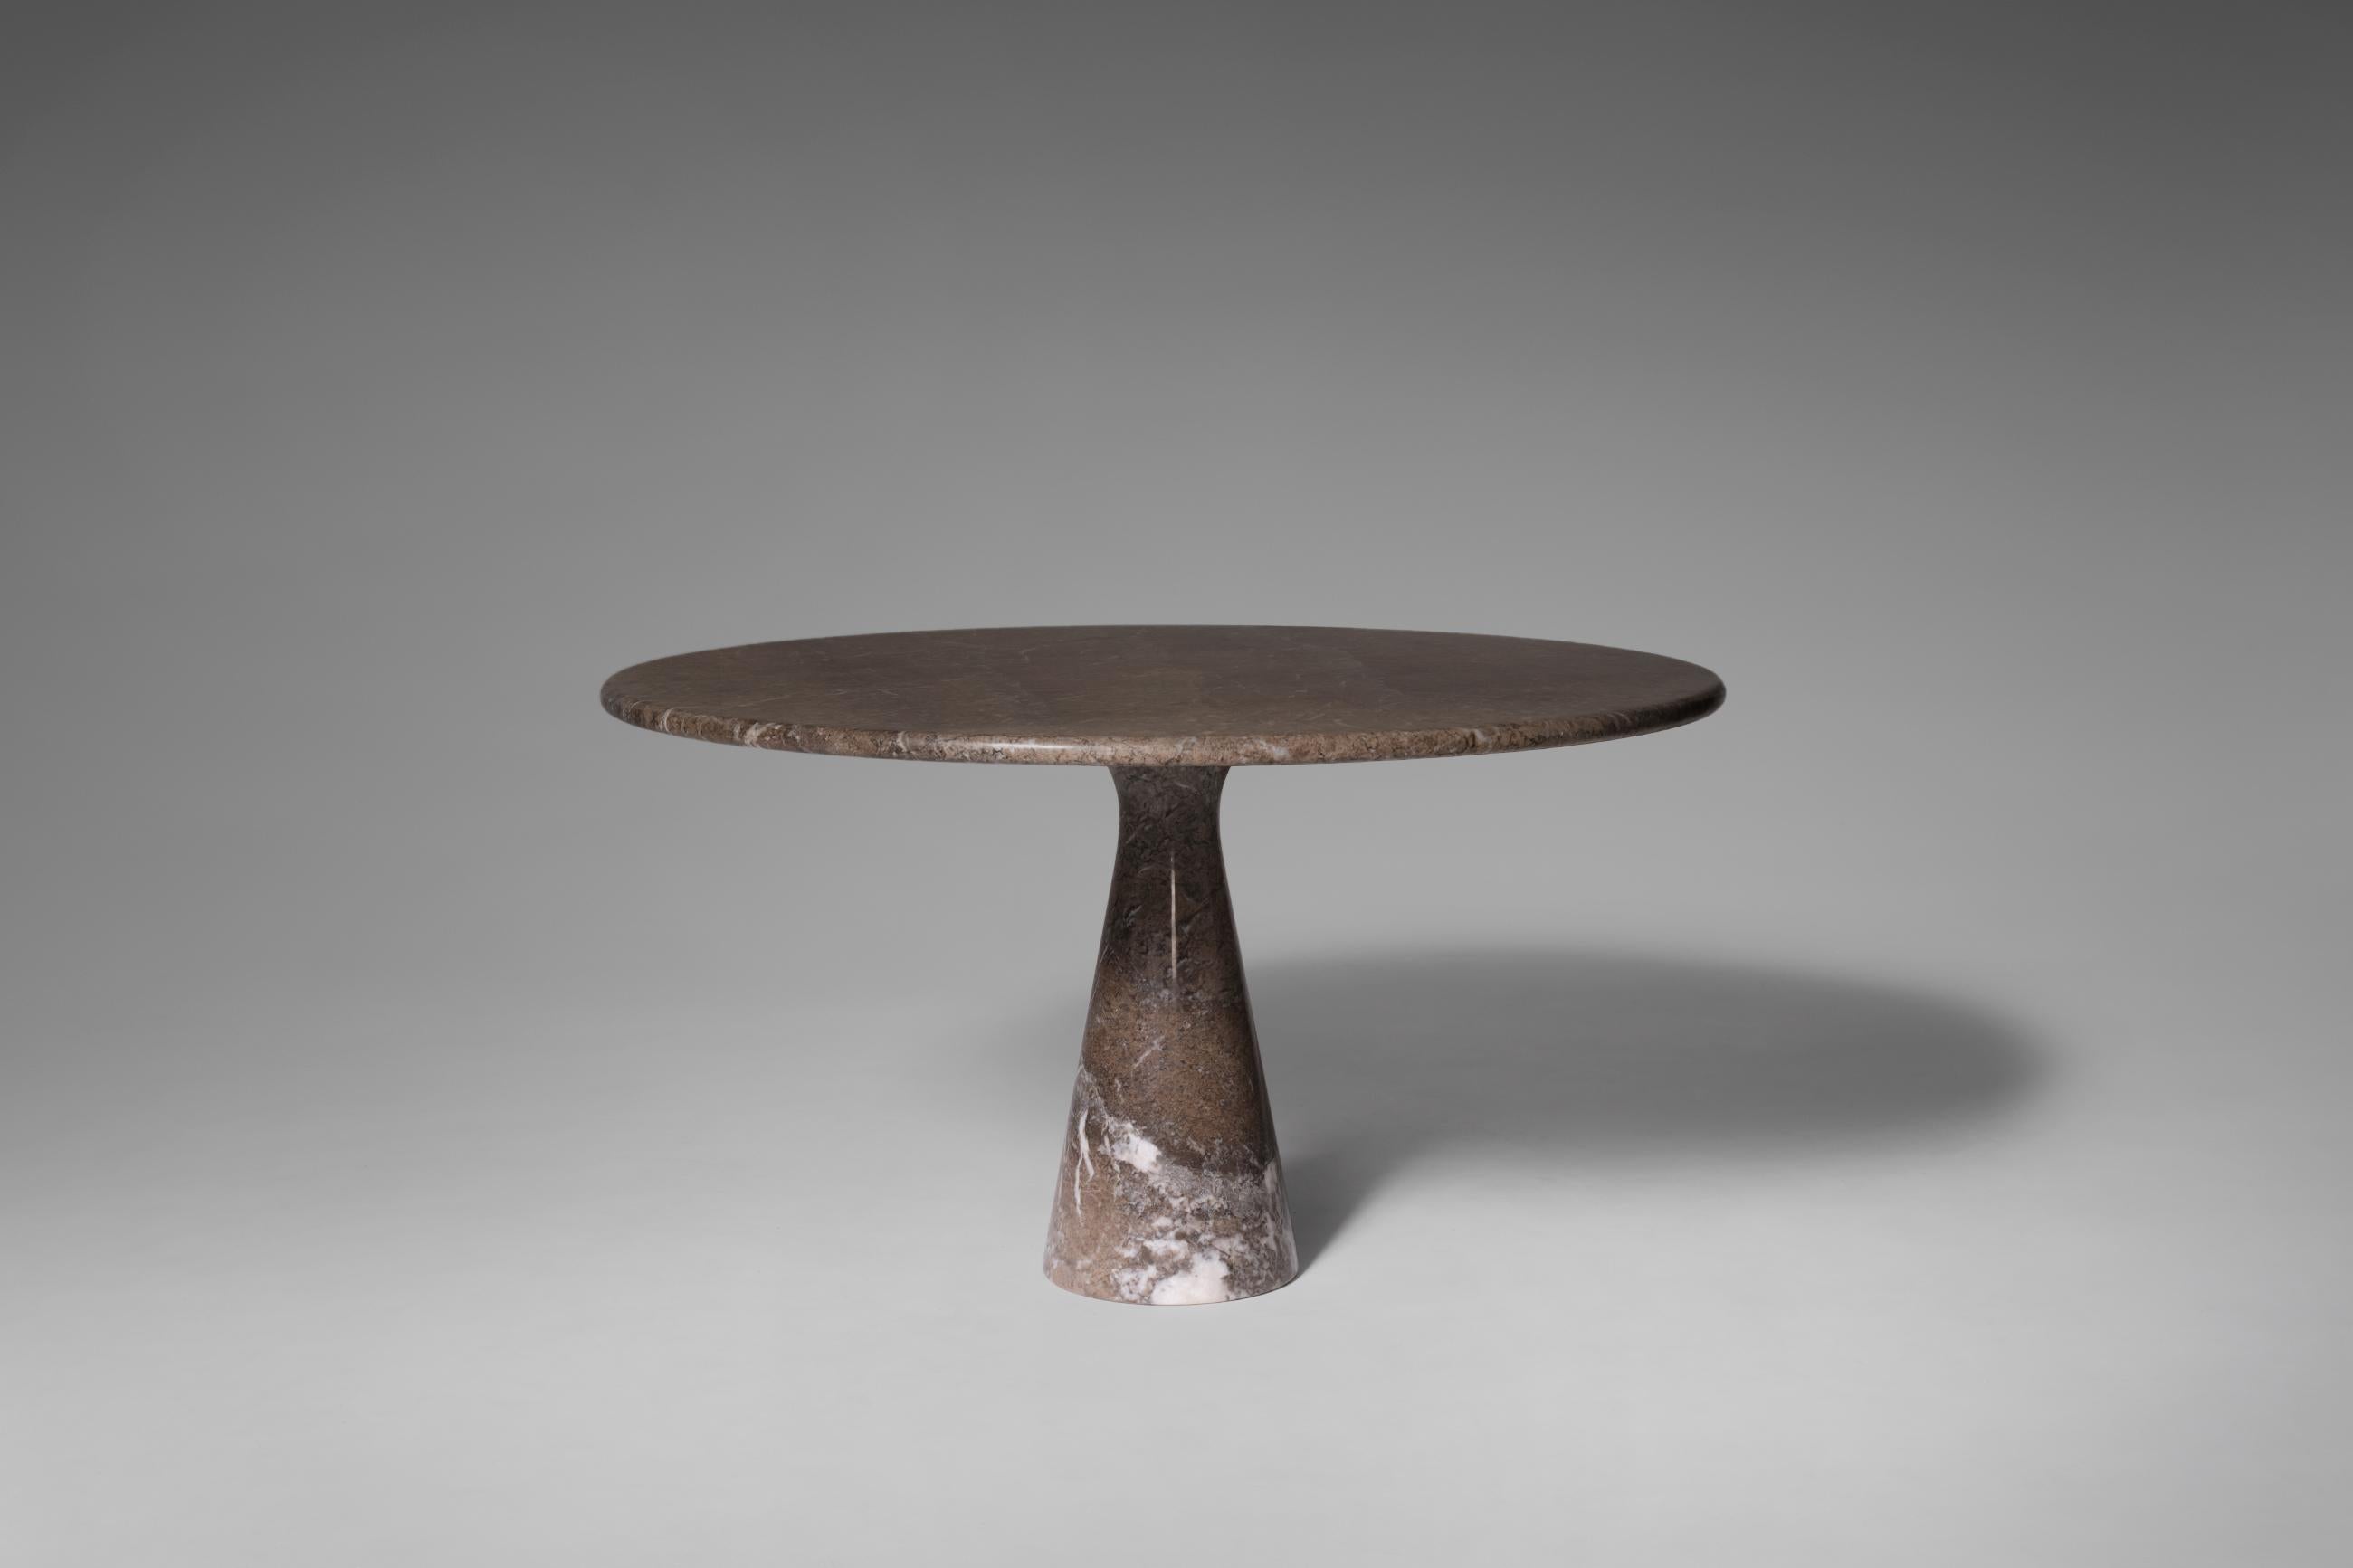 Beautiful pedestal dining table model ‘M1’ by Angelo Mangiarotti for Skipper, Italy, 1969. Exceptional brown coloured marble version with a stunning pattern. The 3 cm thick marble top lays on a solid marble cone shaped base, all in perfect balance